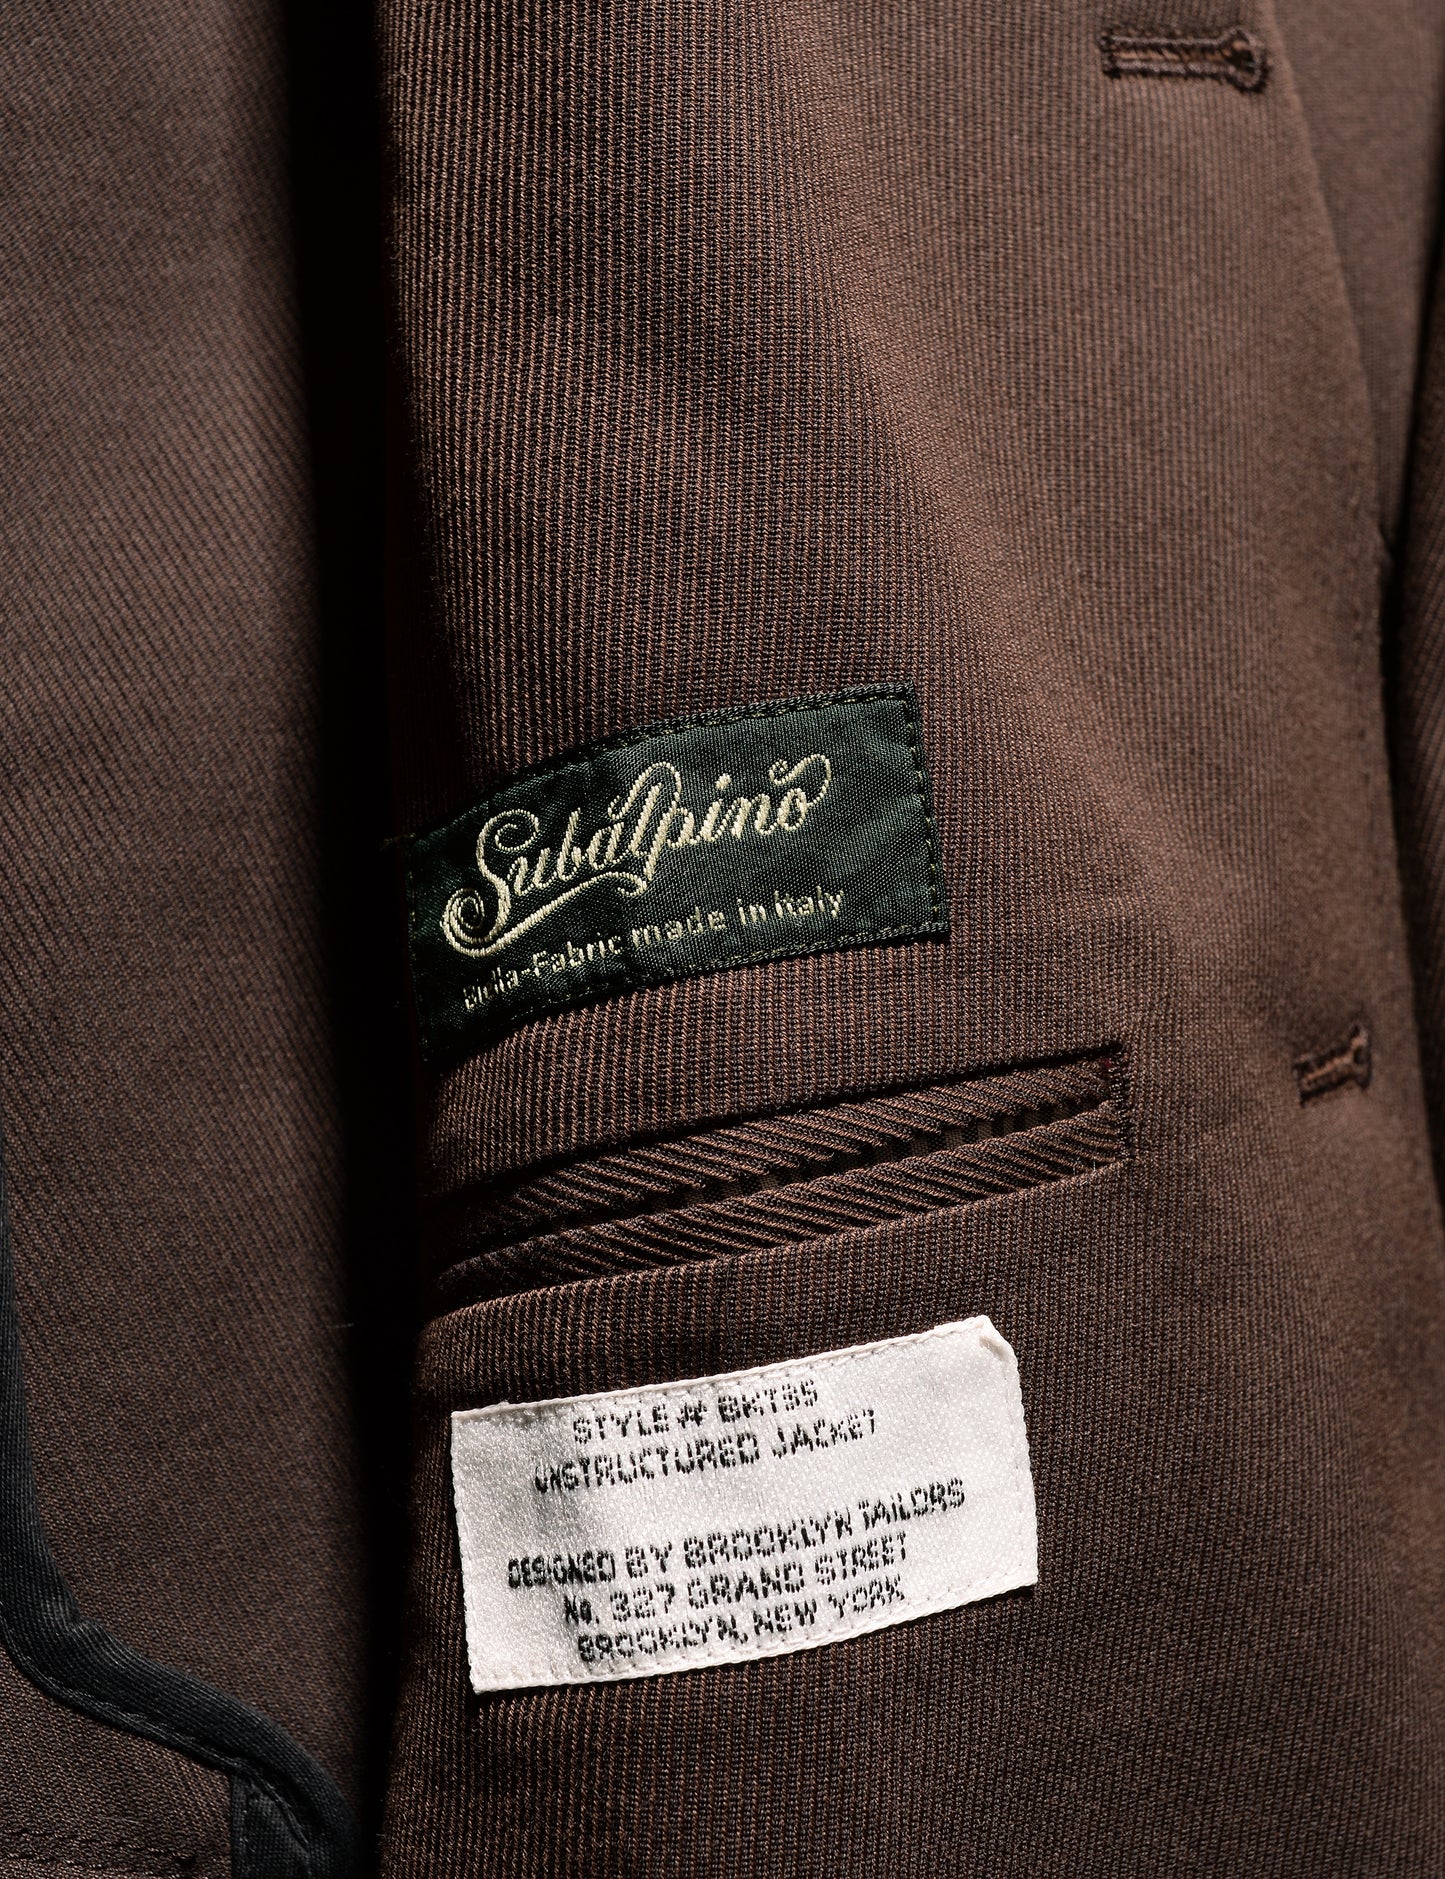 FINAL SALE: BKT35 Unstructured Jacket in Cavalry Twill - Rosewood